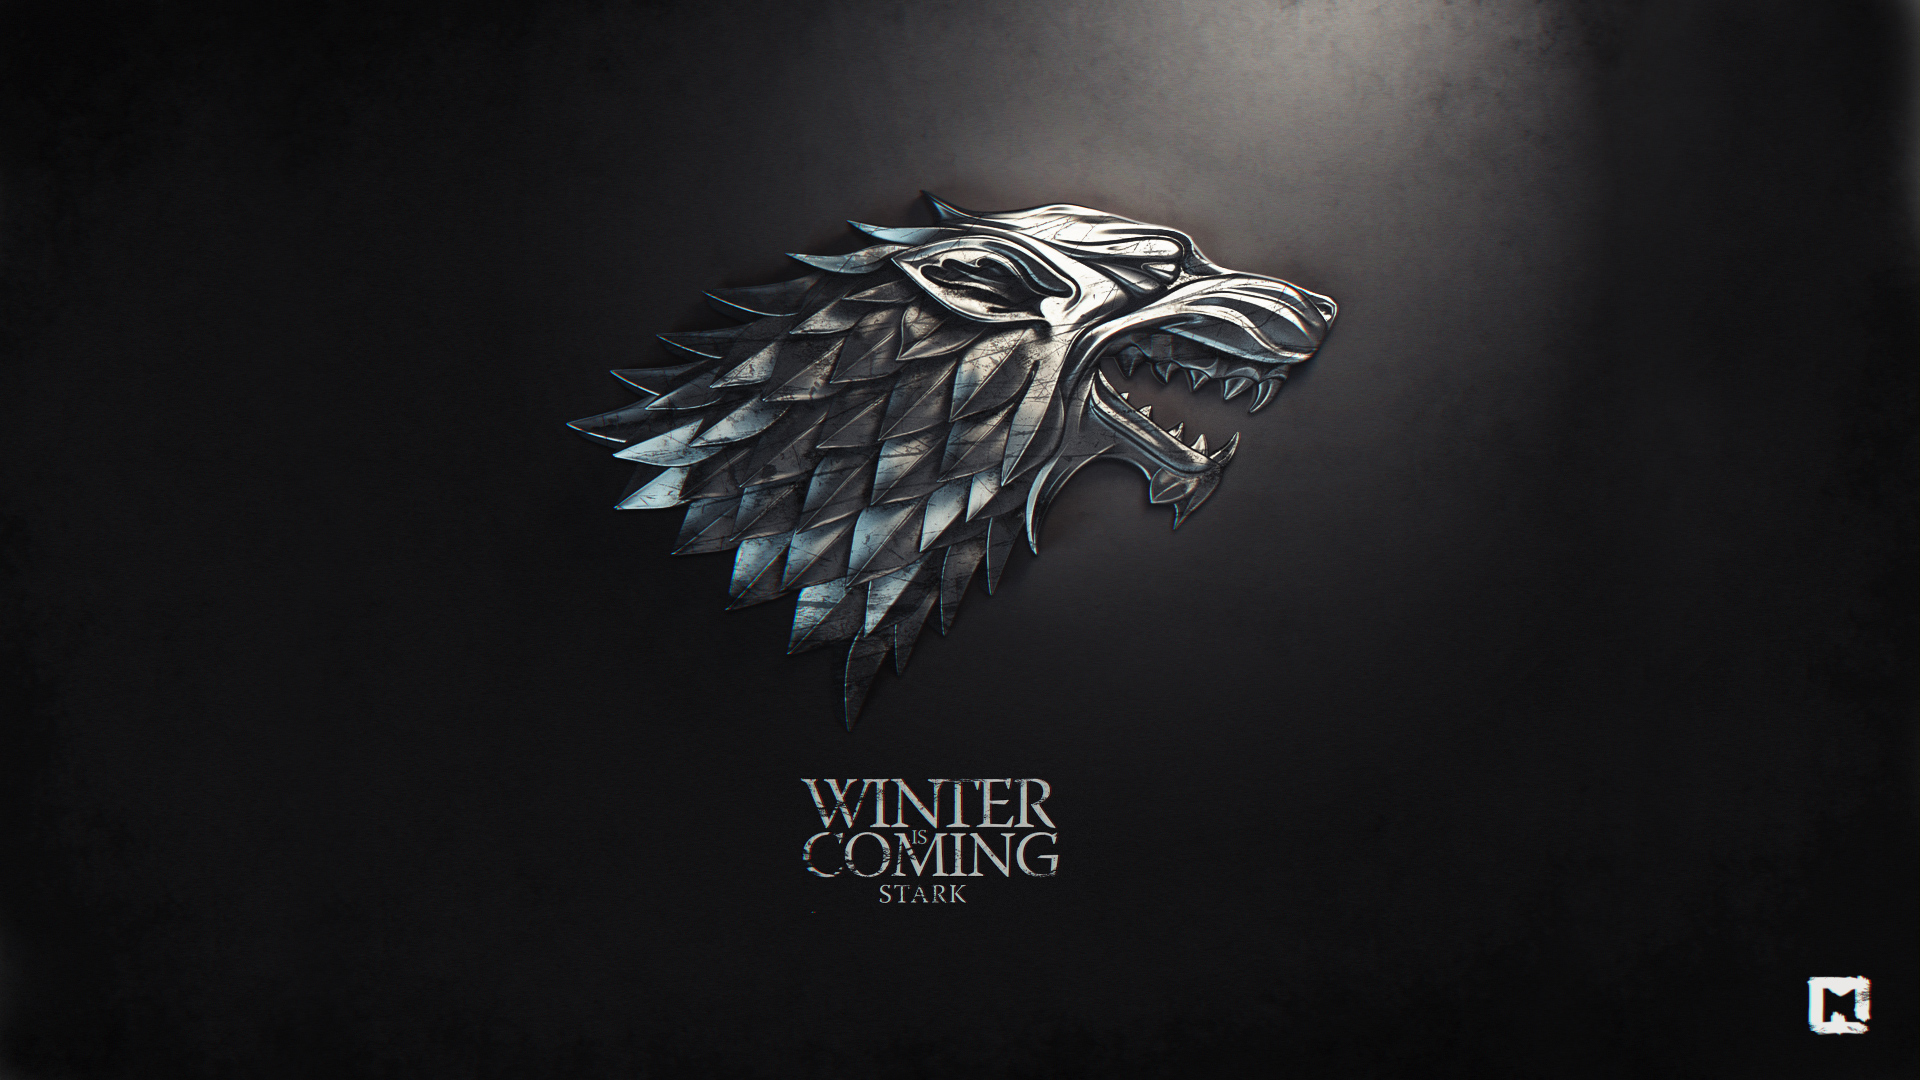 Powerful Game Of Thrones Wallpaper